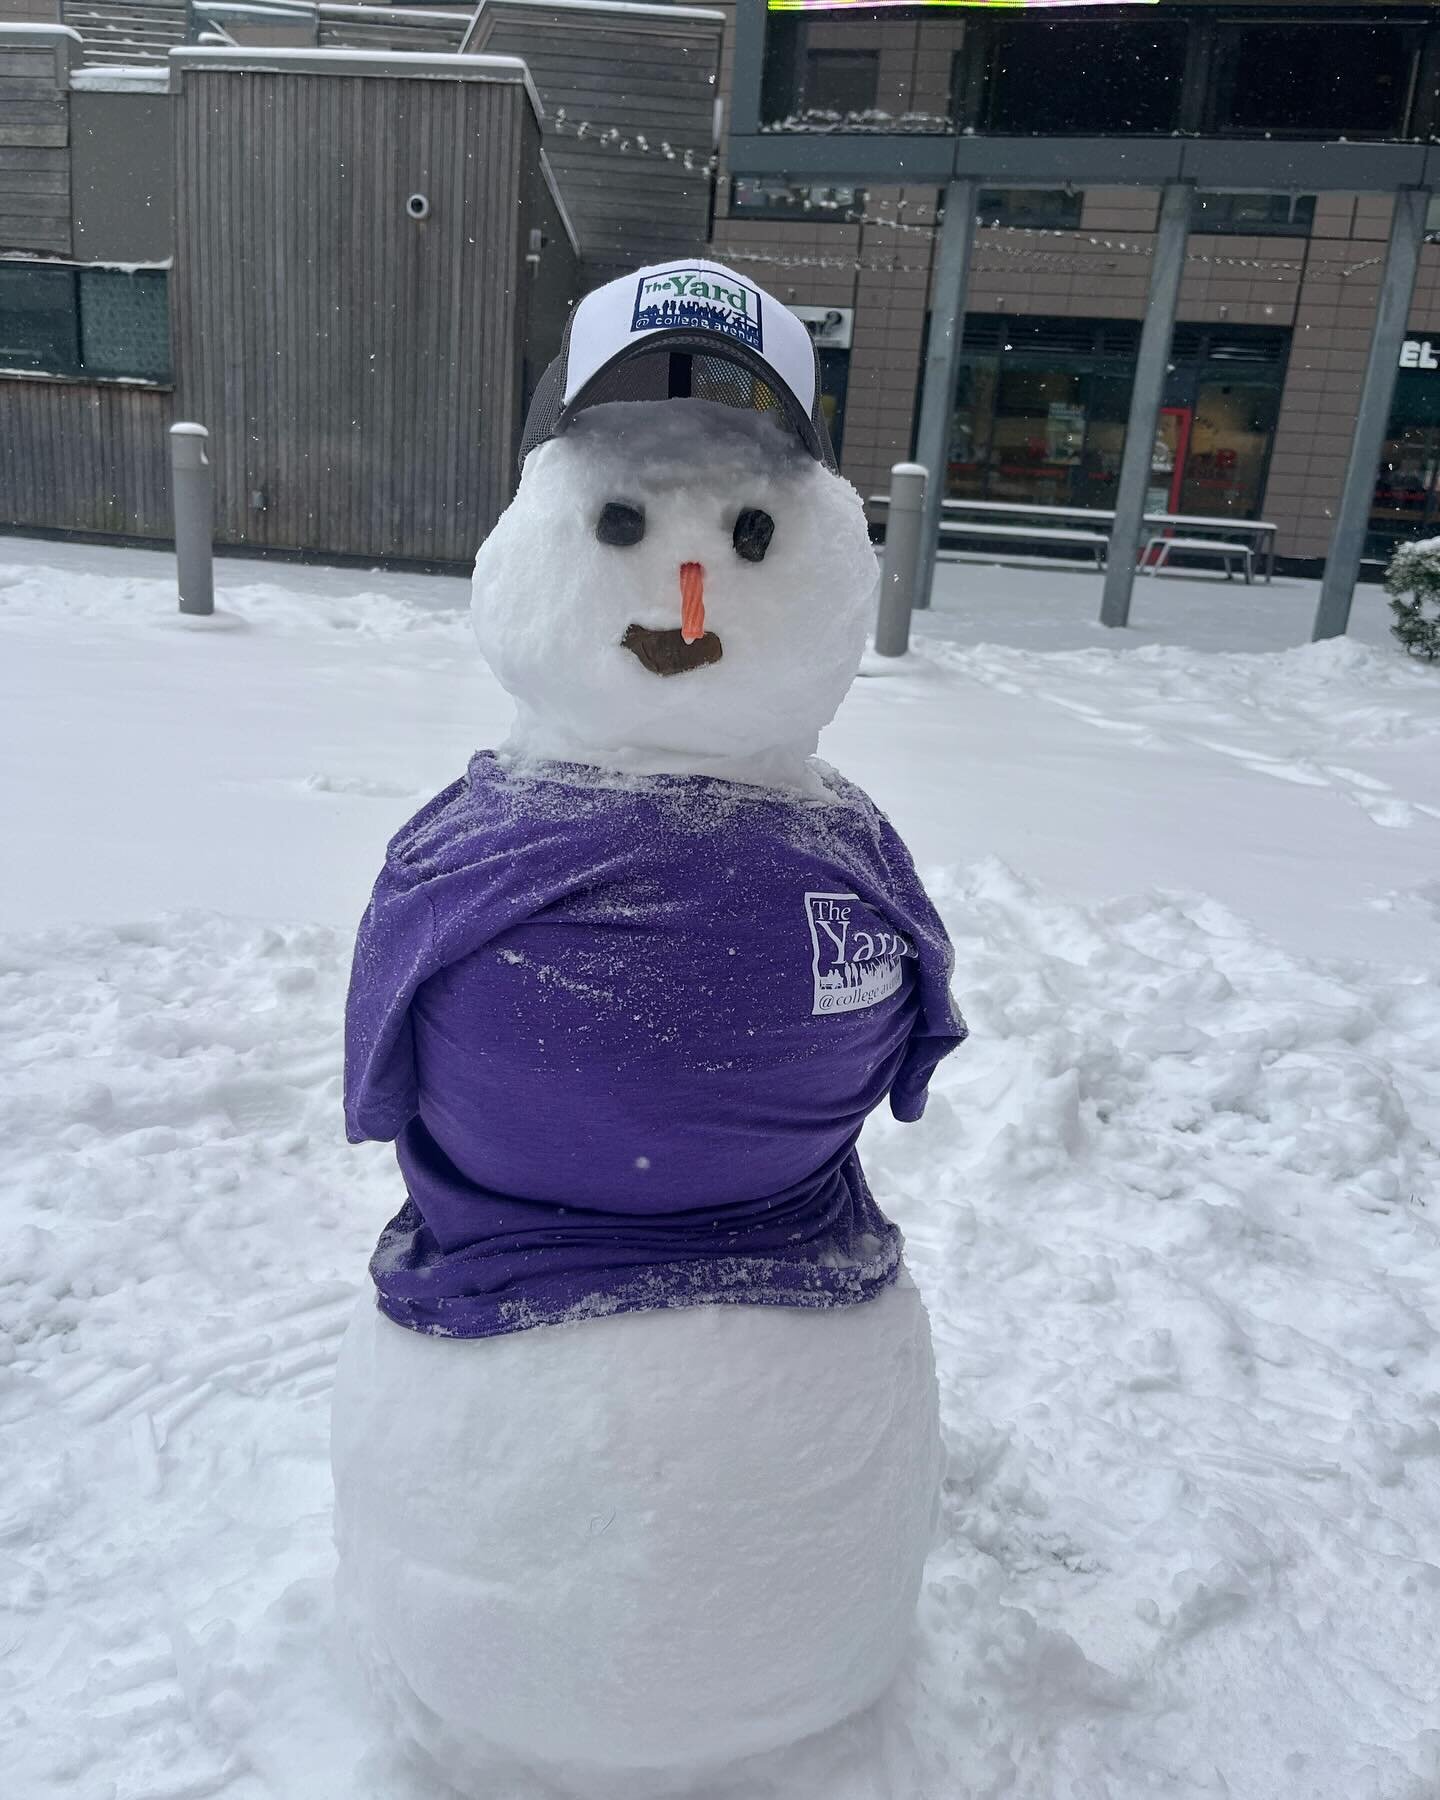 Do you wanna build a snowman?! ⛄️ show us your pics ⬇️ 
.
.
#theyard #theyardru #theyardrutgers #theyardatcollegeave #collegeave #newbrunswick #newbrunswicknj #ru #rutgers #rutgersu #rutgersuniversity #rutgersnewbrunswick #rutgersnb #rutgersuniversit